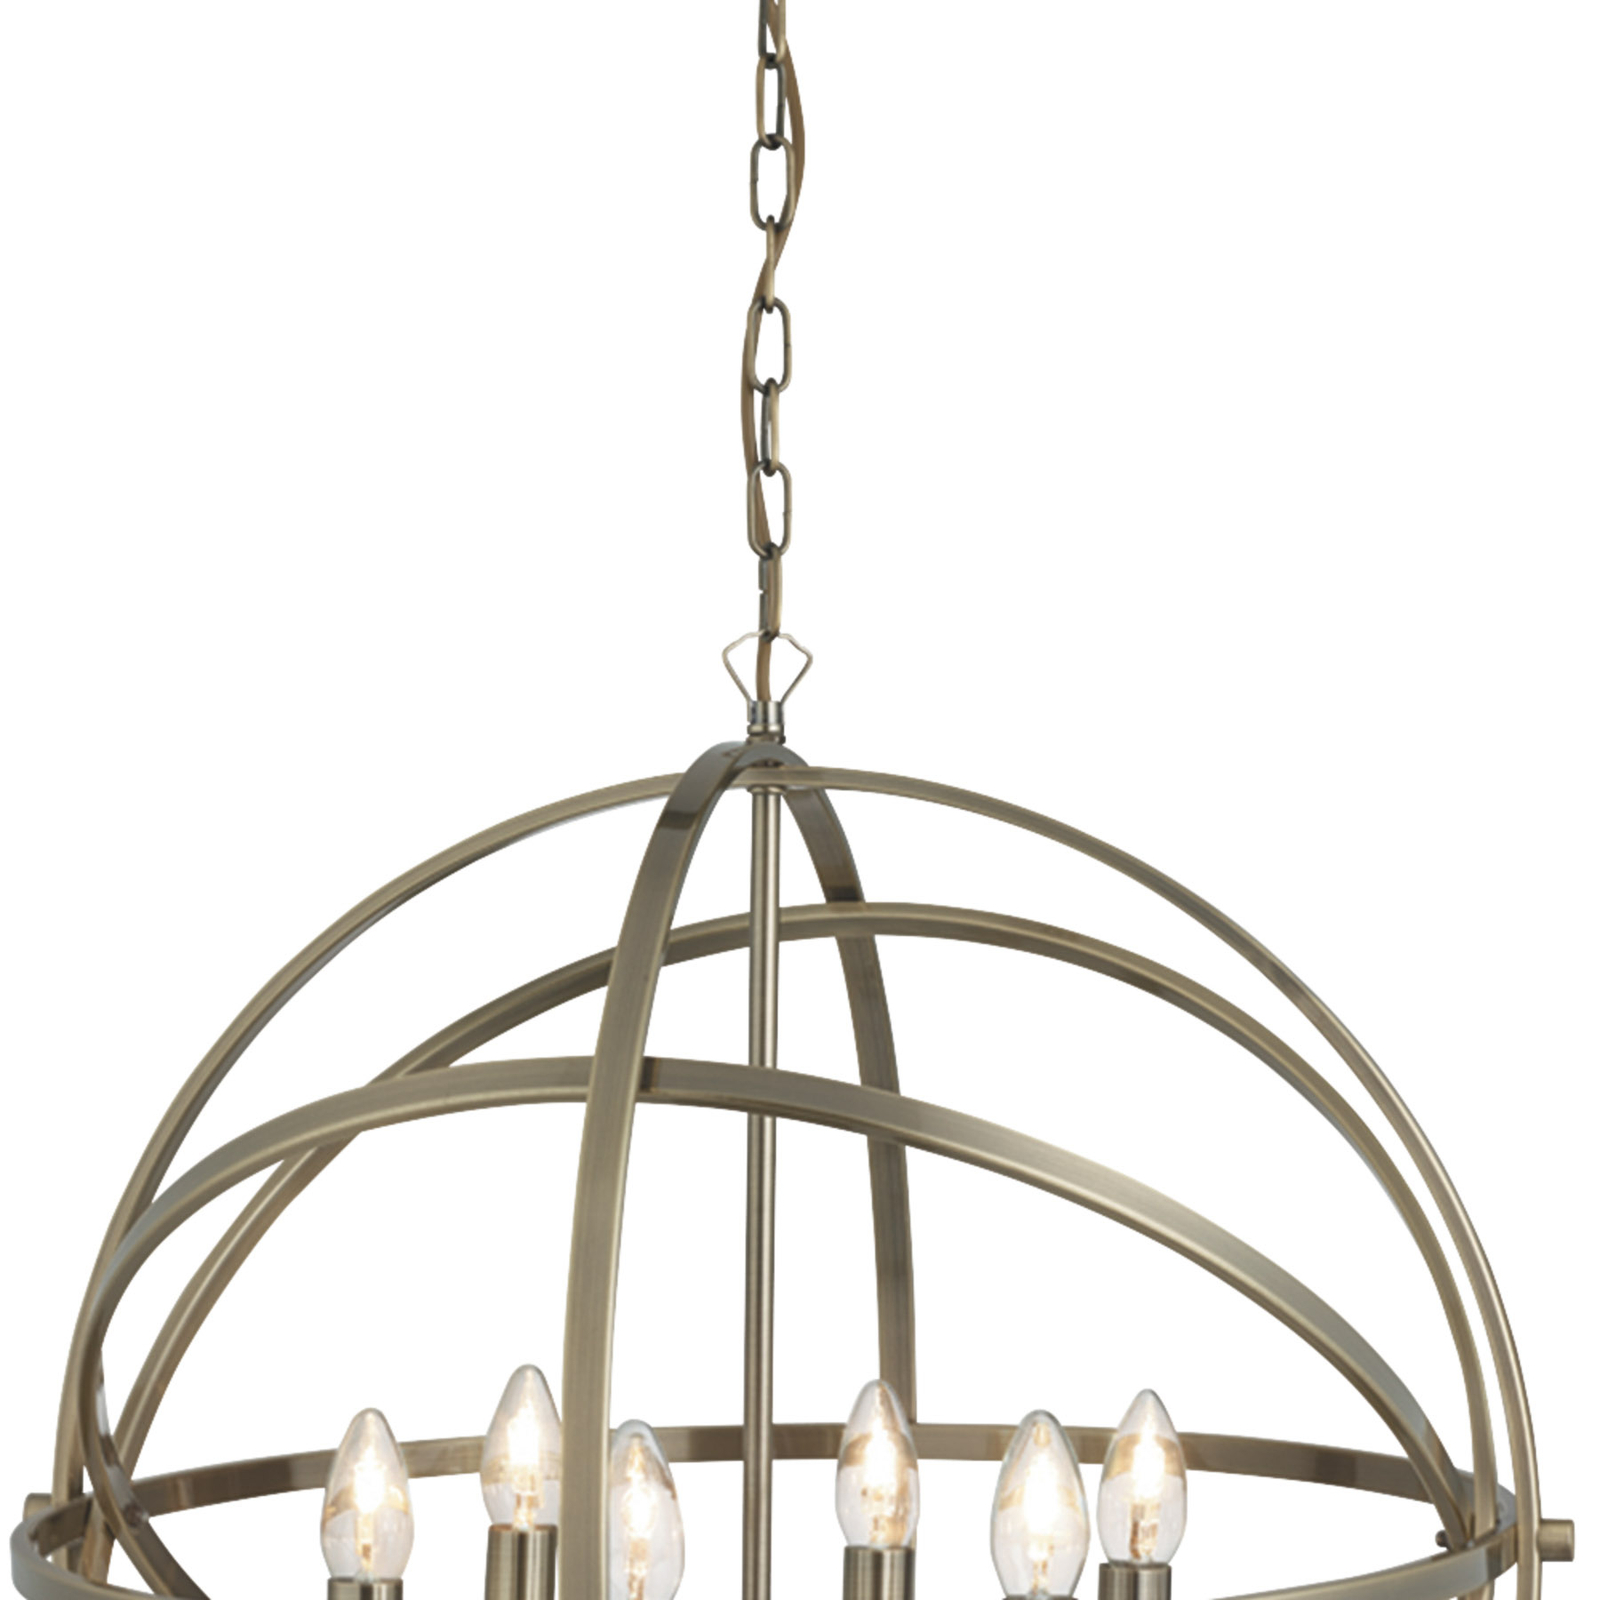 Orbit hanging light with a cage design